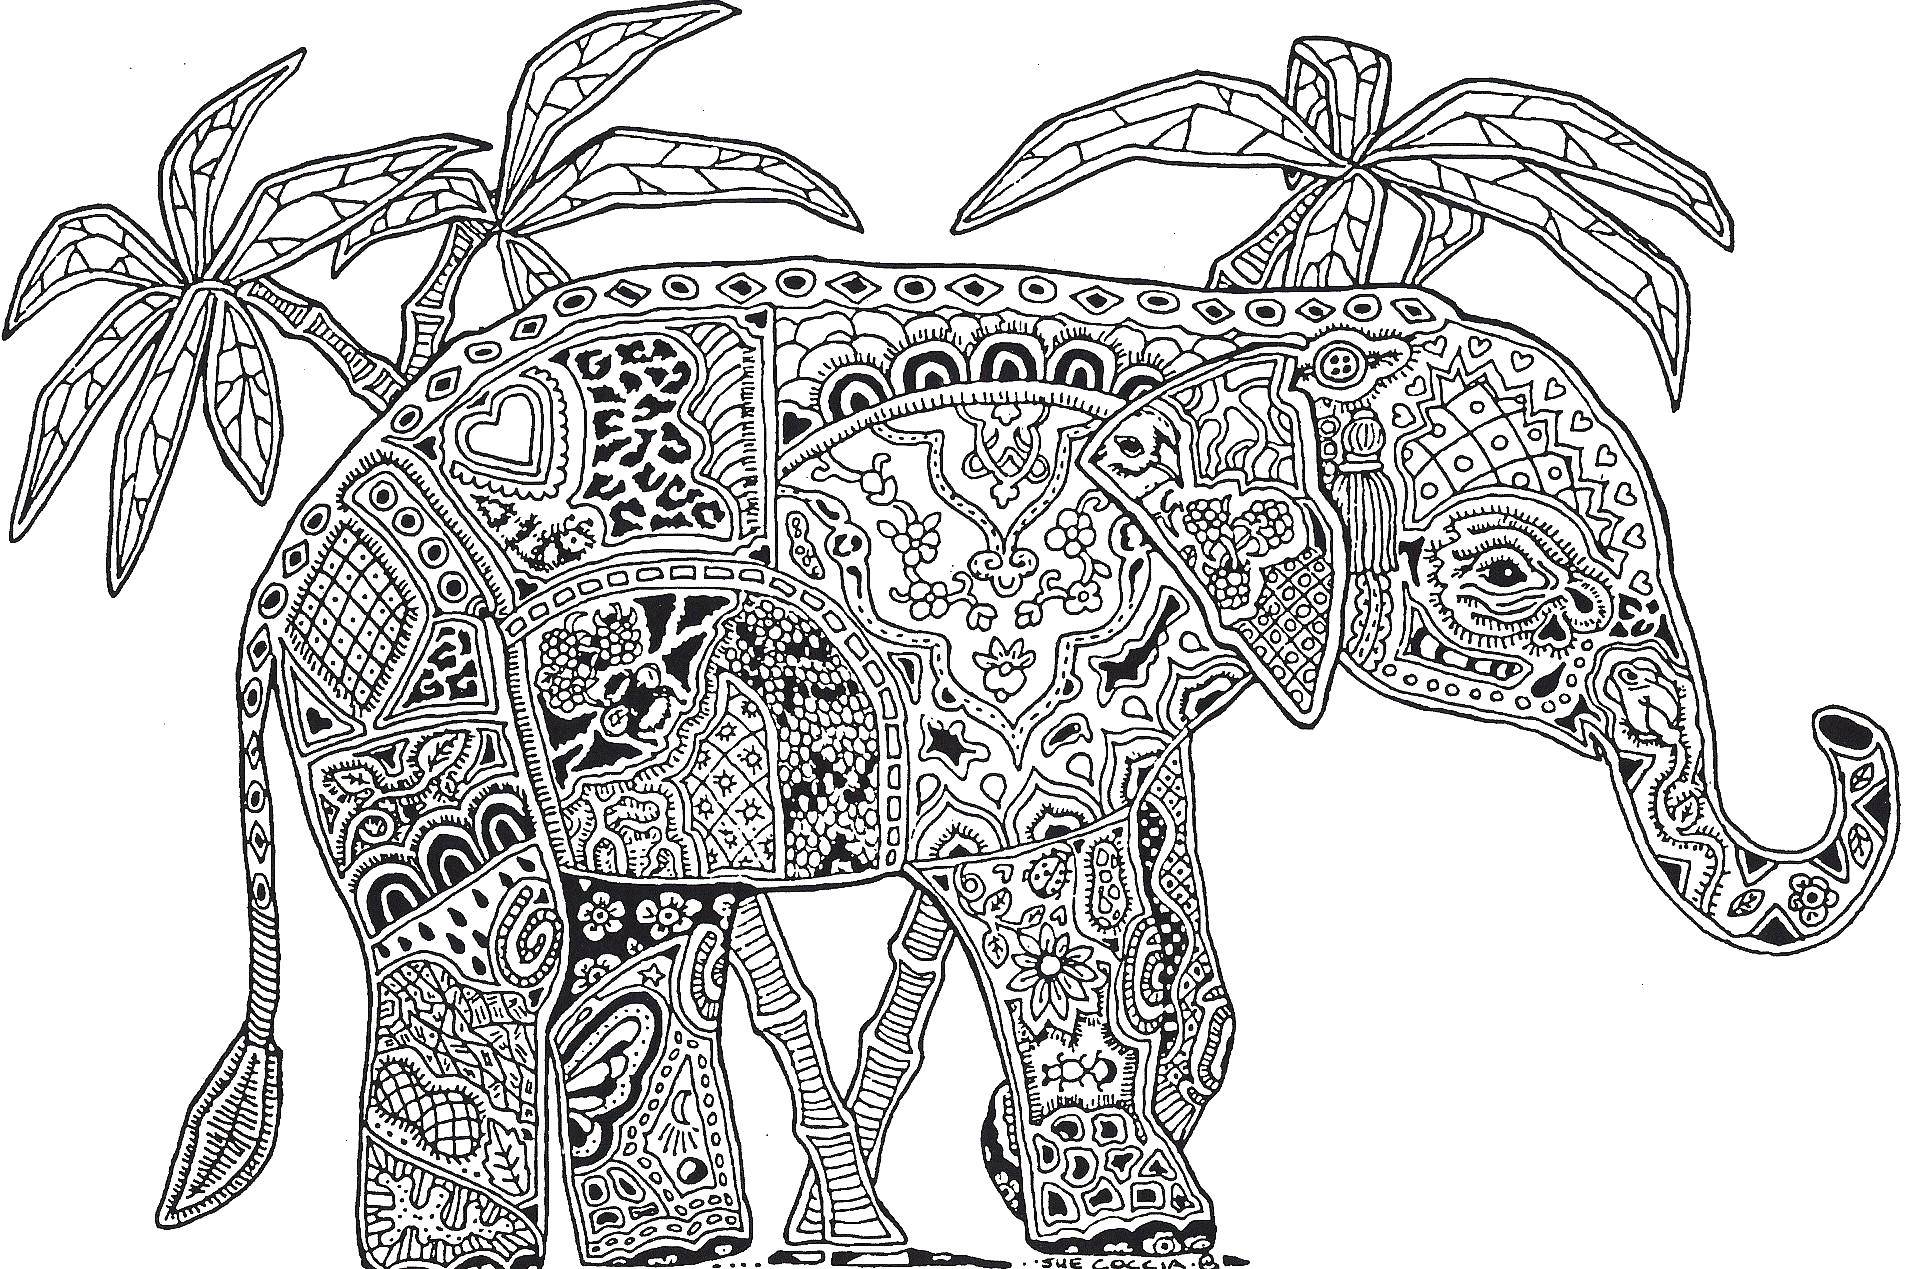 Coloring Patterned elephant among the palm trees. Category coloring antistress. Tags:  Bathroom with shower.